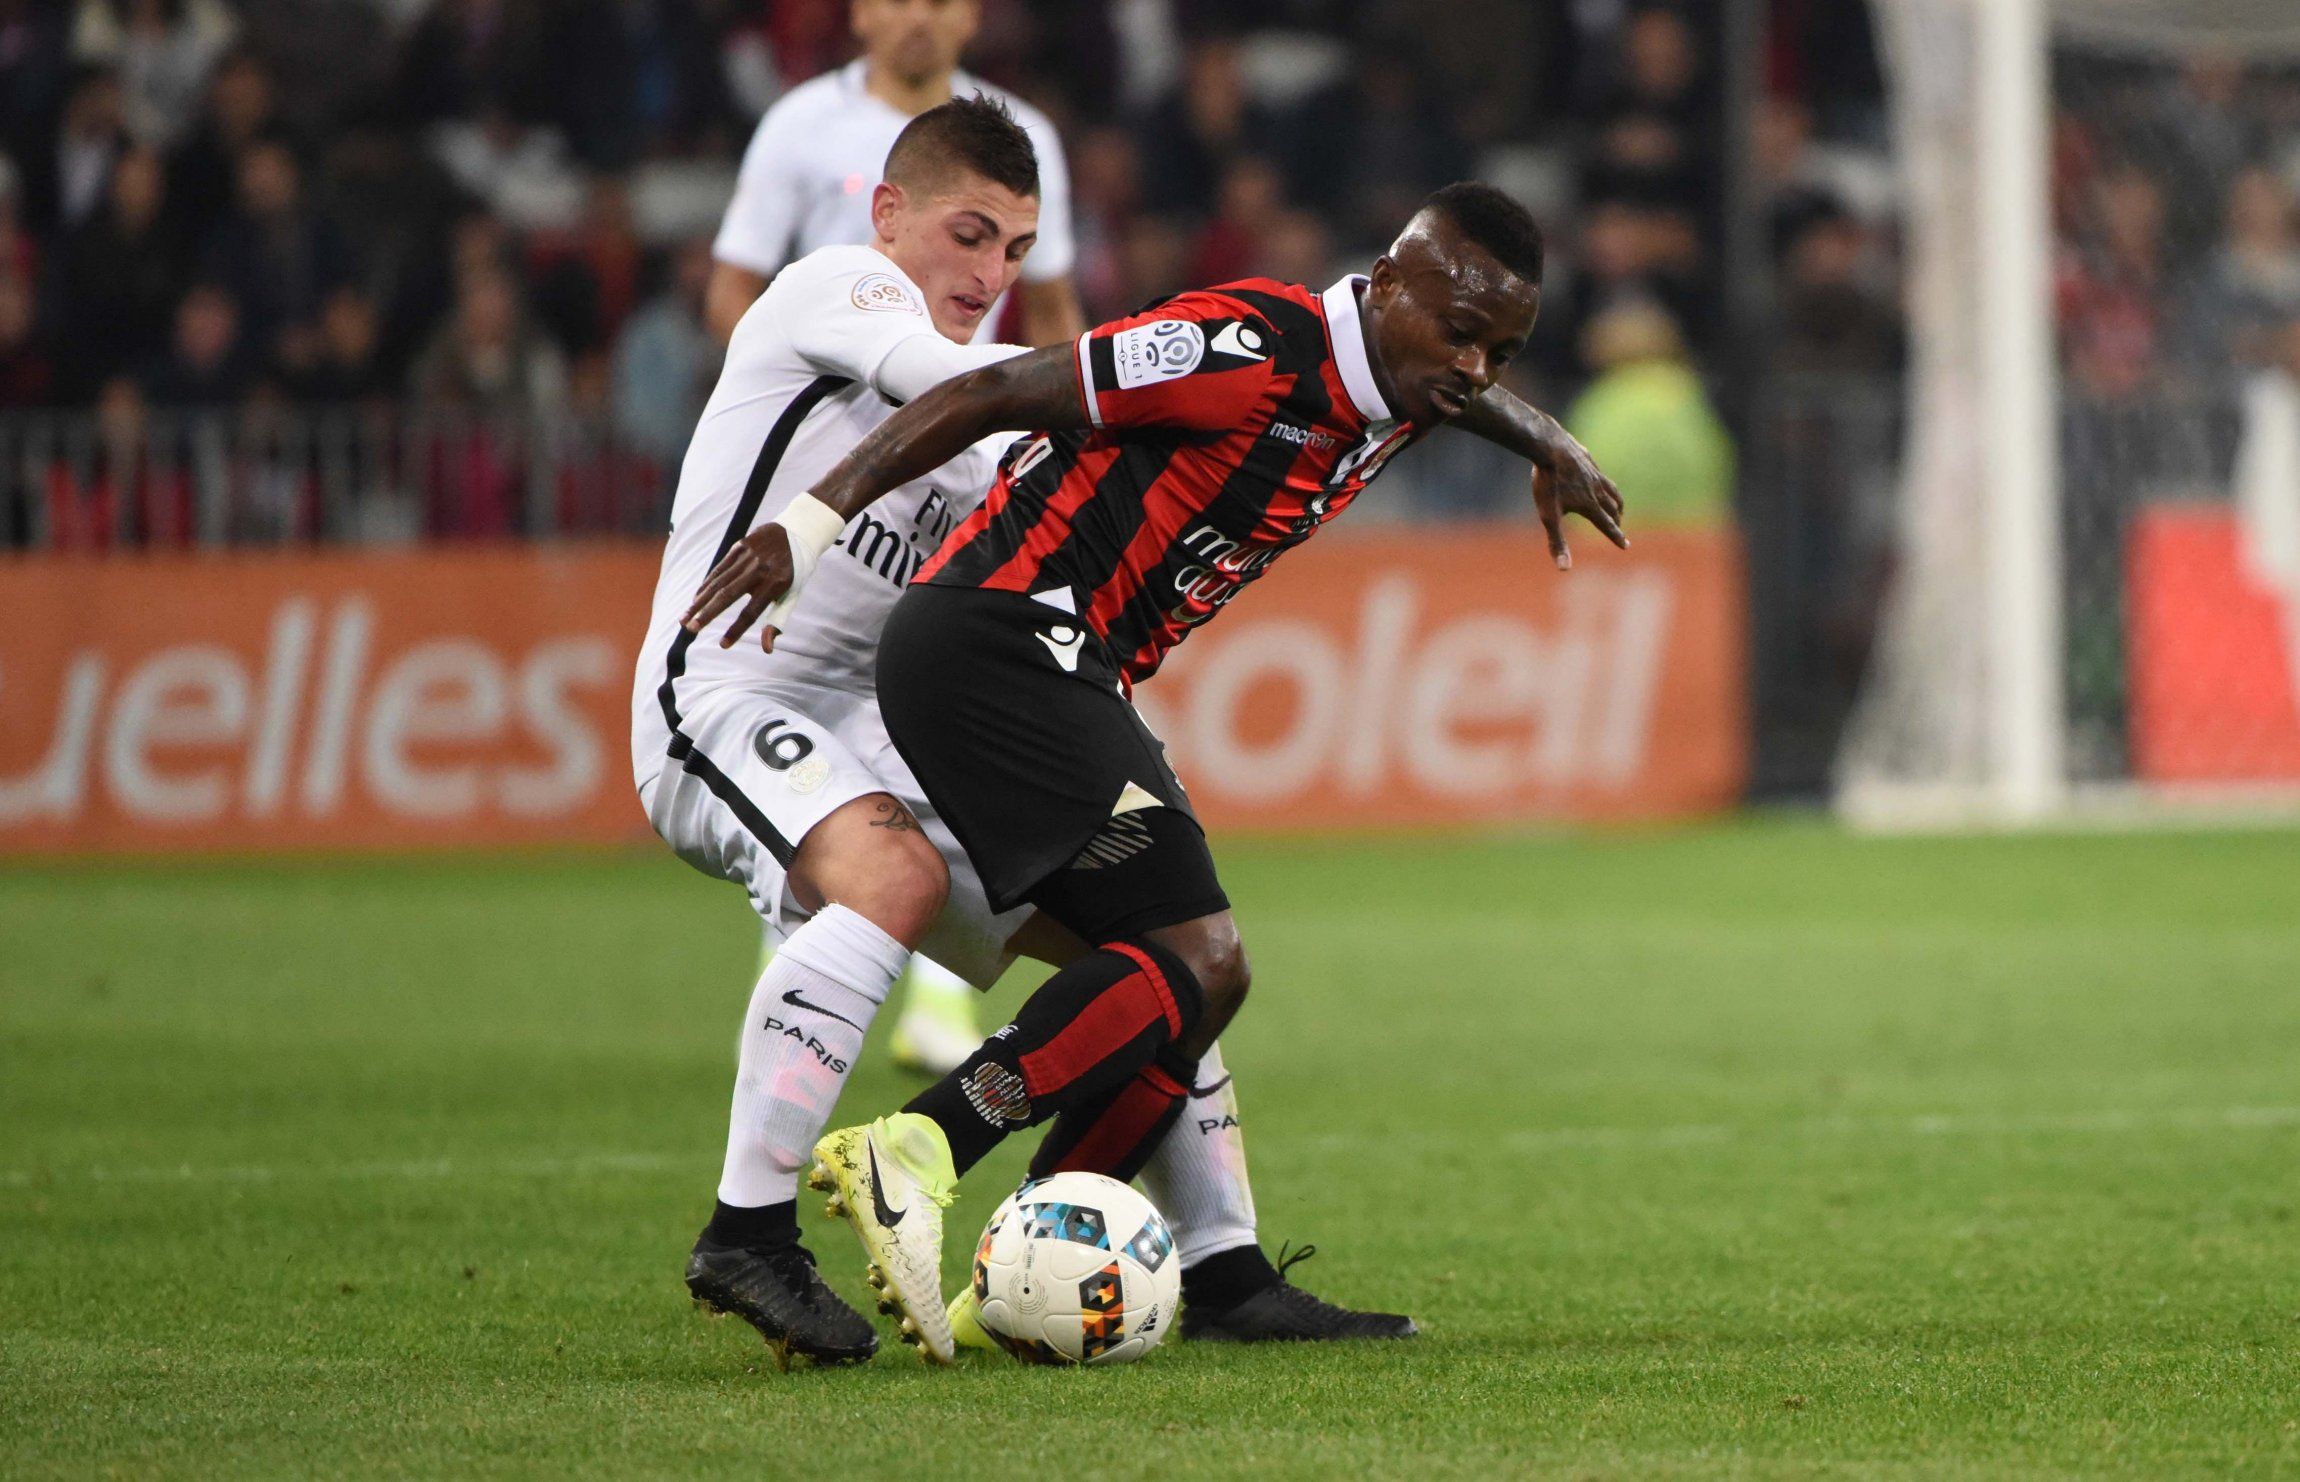 Jean Michael Seri in action for Nice